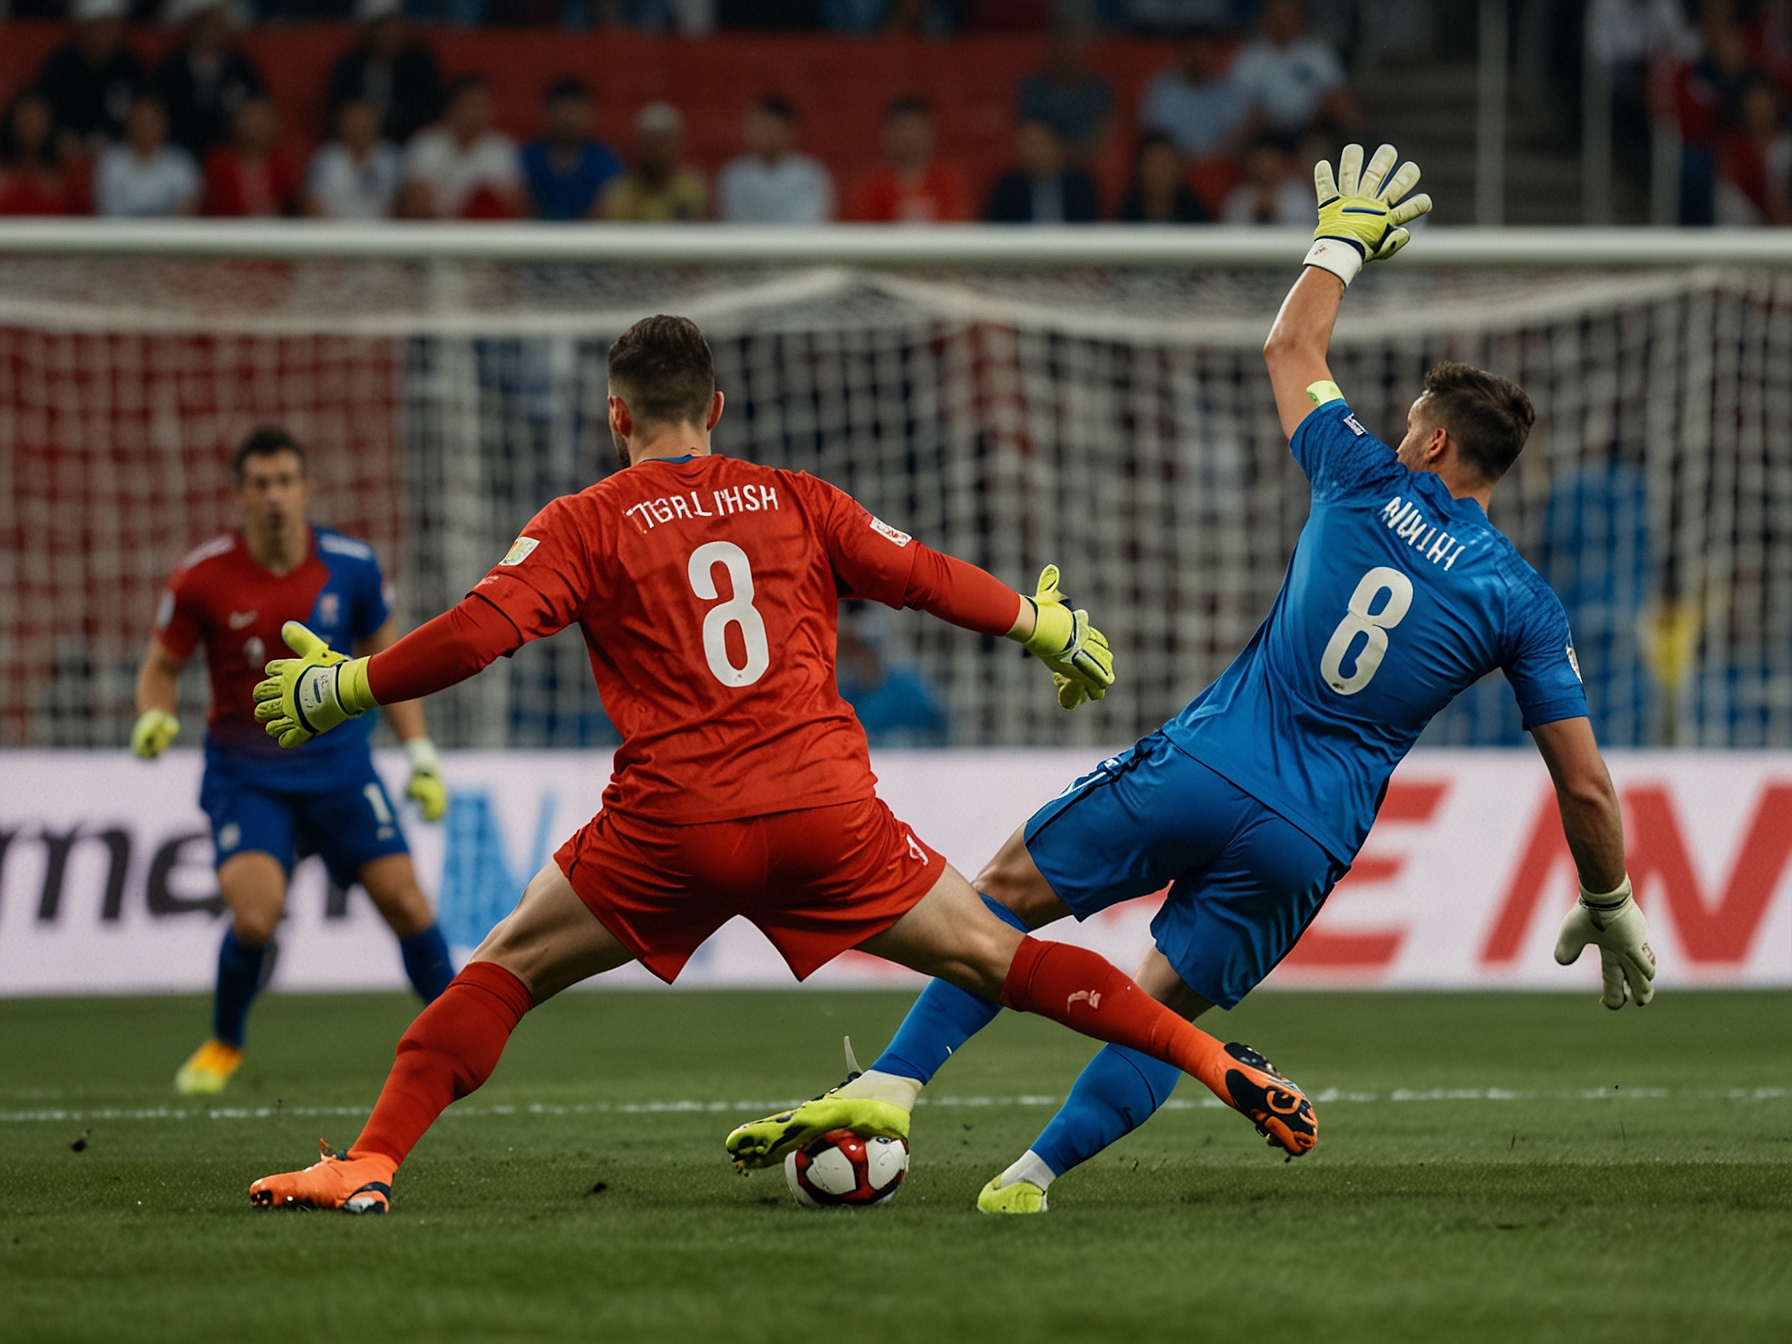 The Turkish goalkeeper makes a crucial save during the tight match against the Czech Republic, showcasing the defensive resilience that helped secure their place in the last 16.